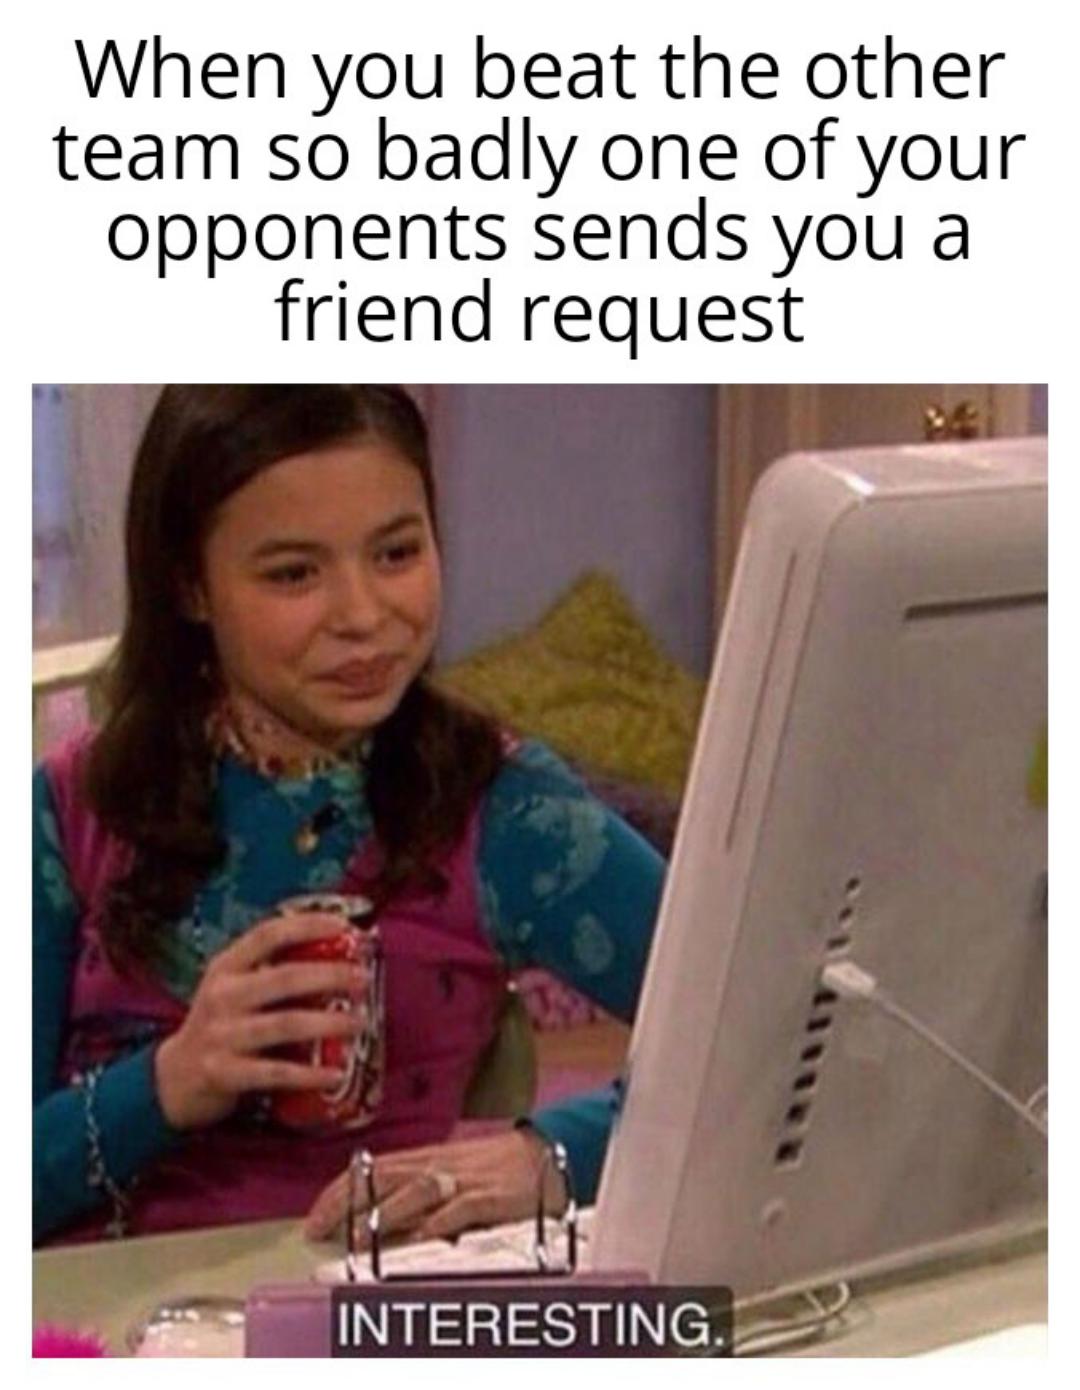 dank memes - interesting memes - When you beat the other team so badly one of your opponents sends you a friend request Interesting.